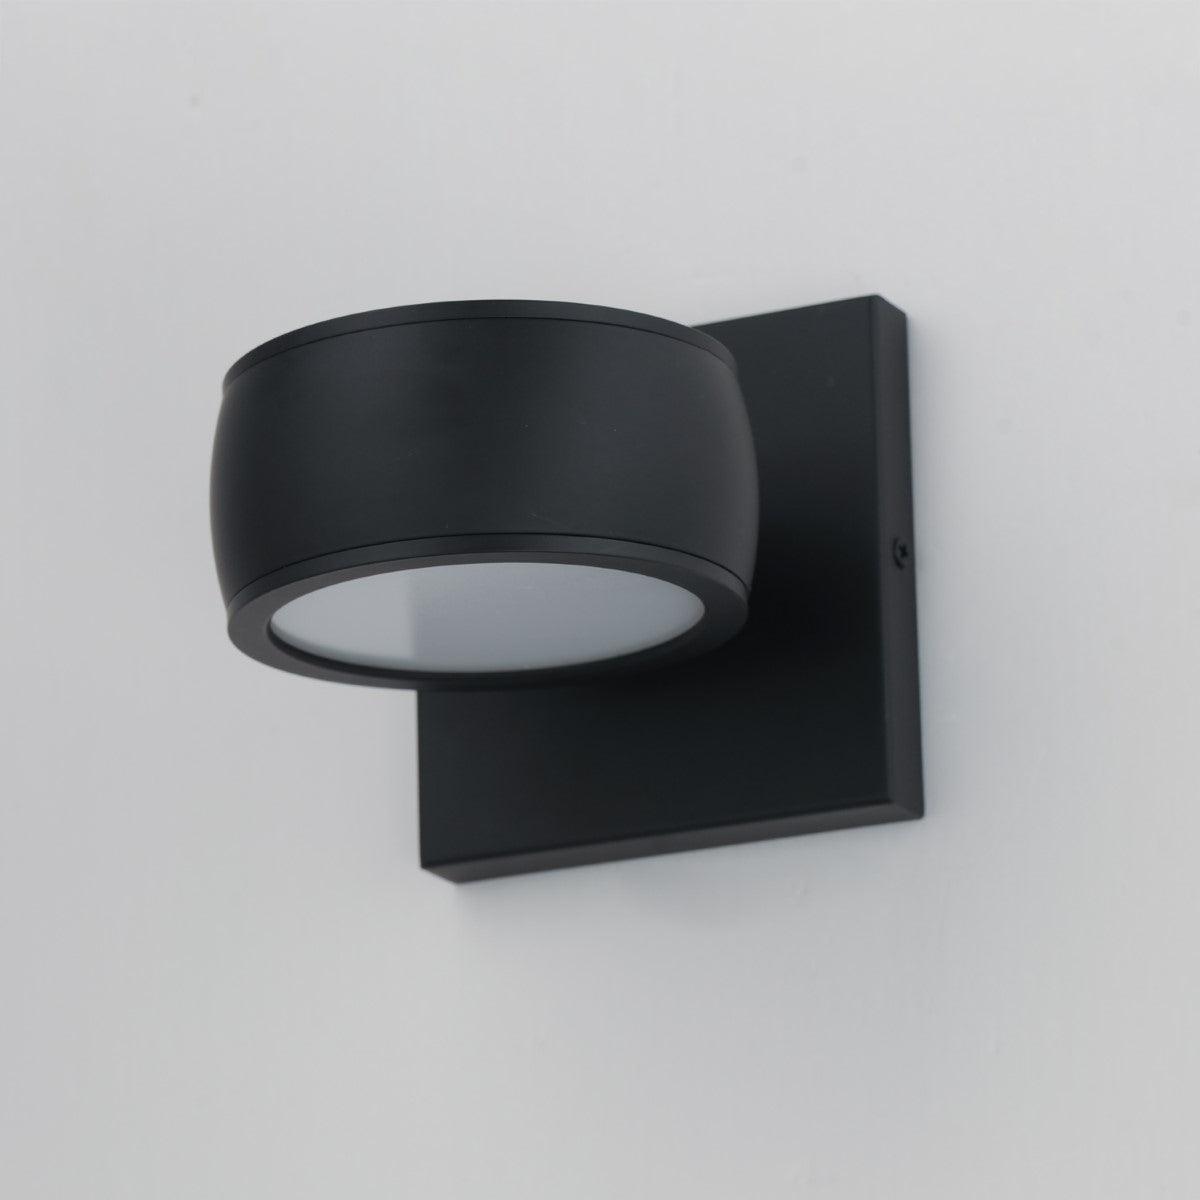 Modular 5 in. Circle LED Outdoor Wall Sconce 3000K Black Finish